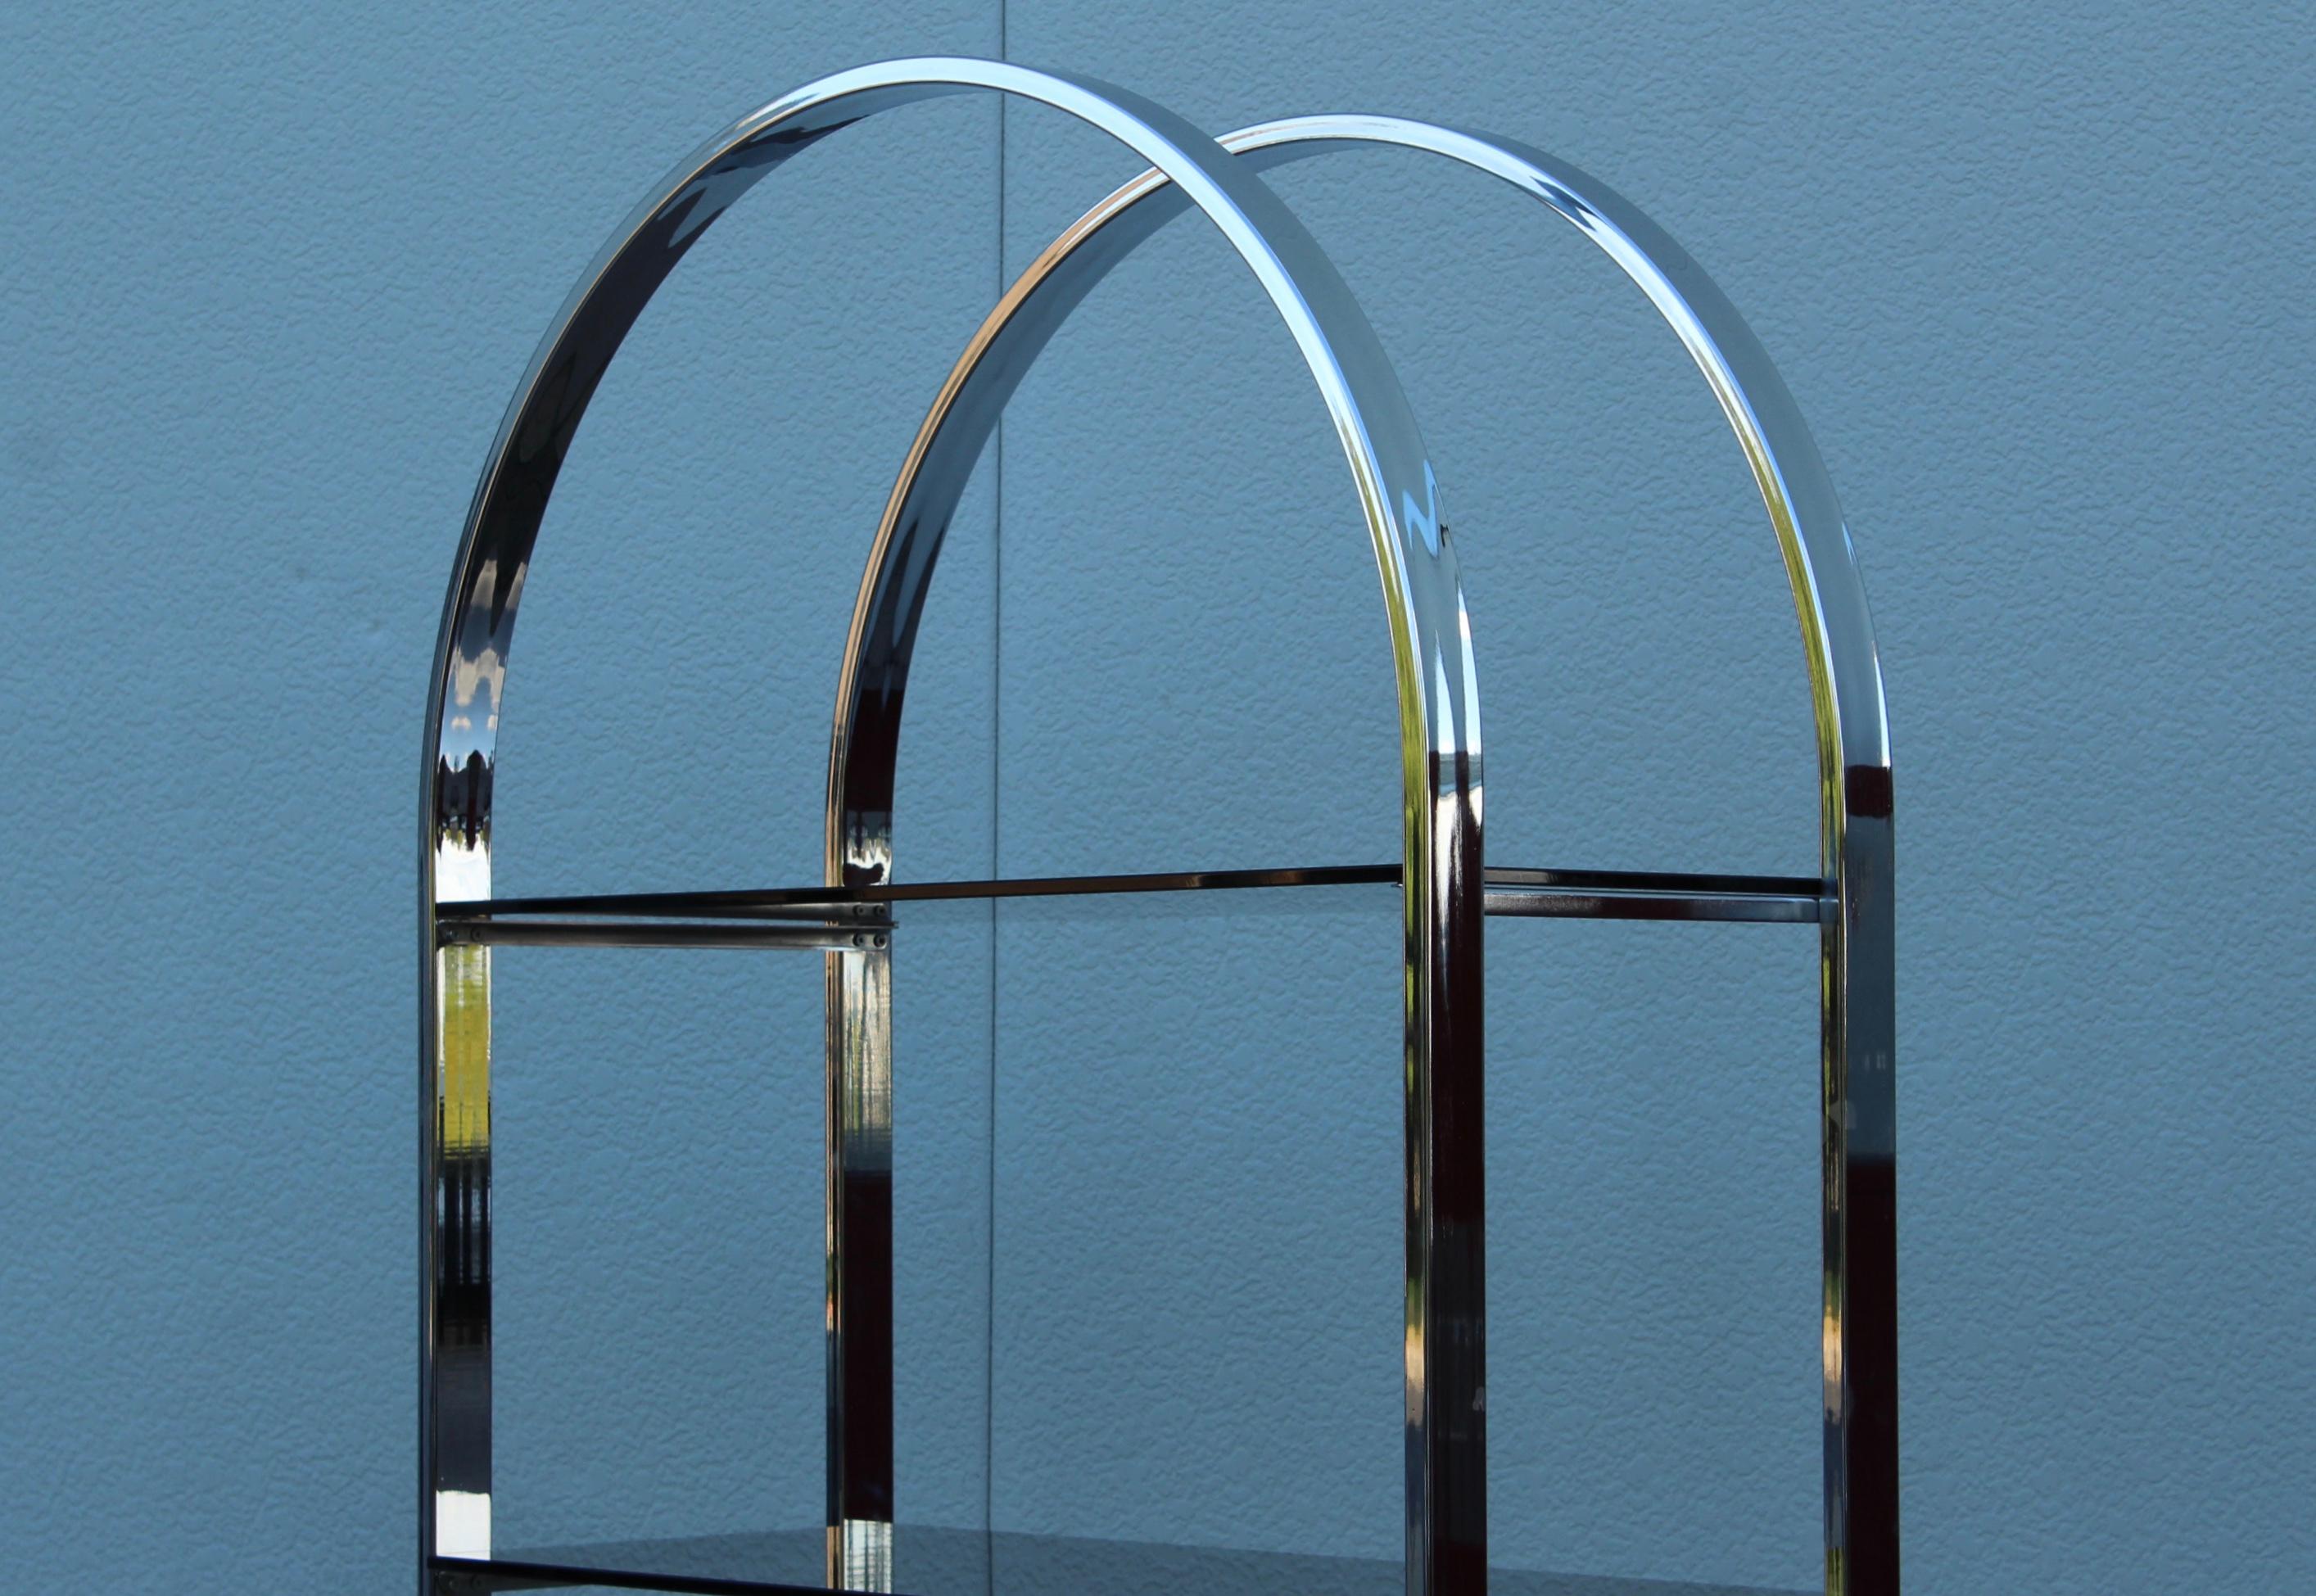 1970's Mid-Century Modern chrome with 4 glass shelves arch etagere, In vintage condition with minor wear and patina to the chrome due to age and use.